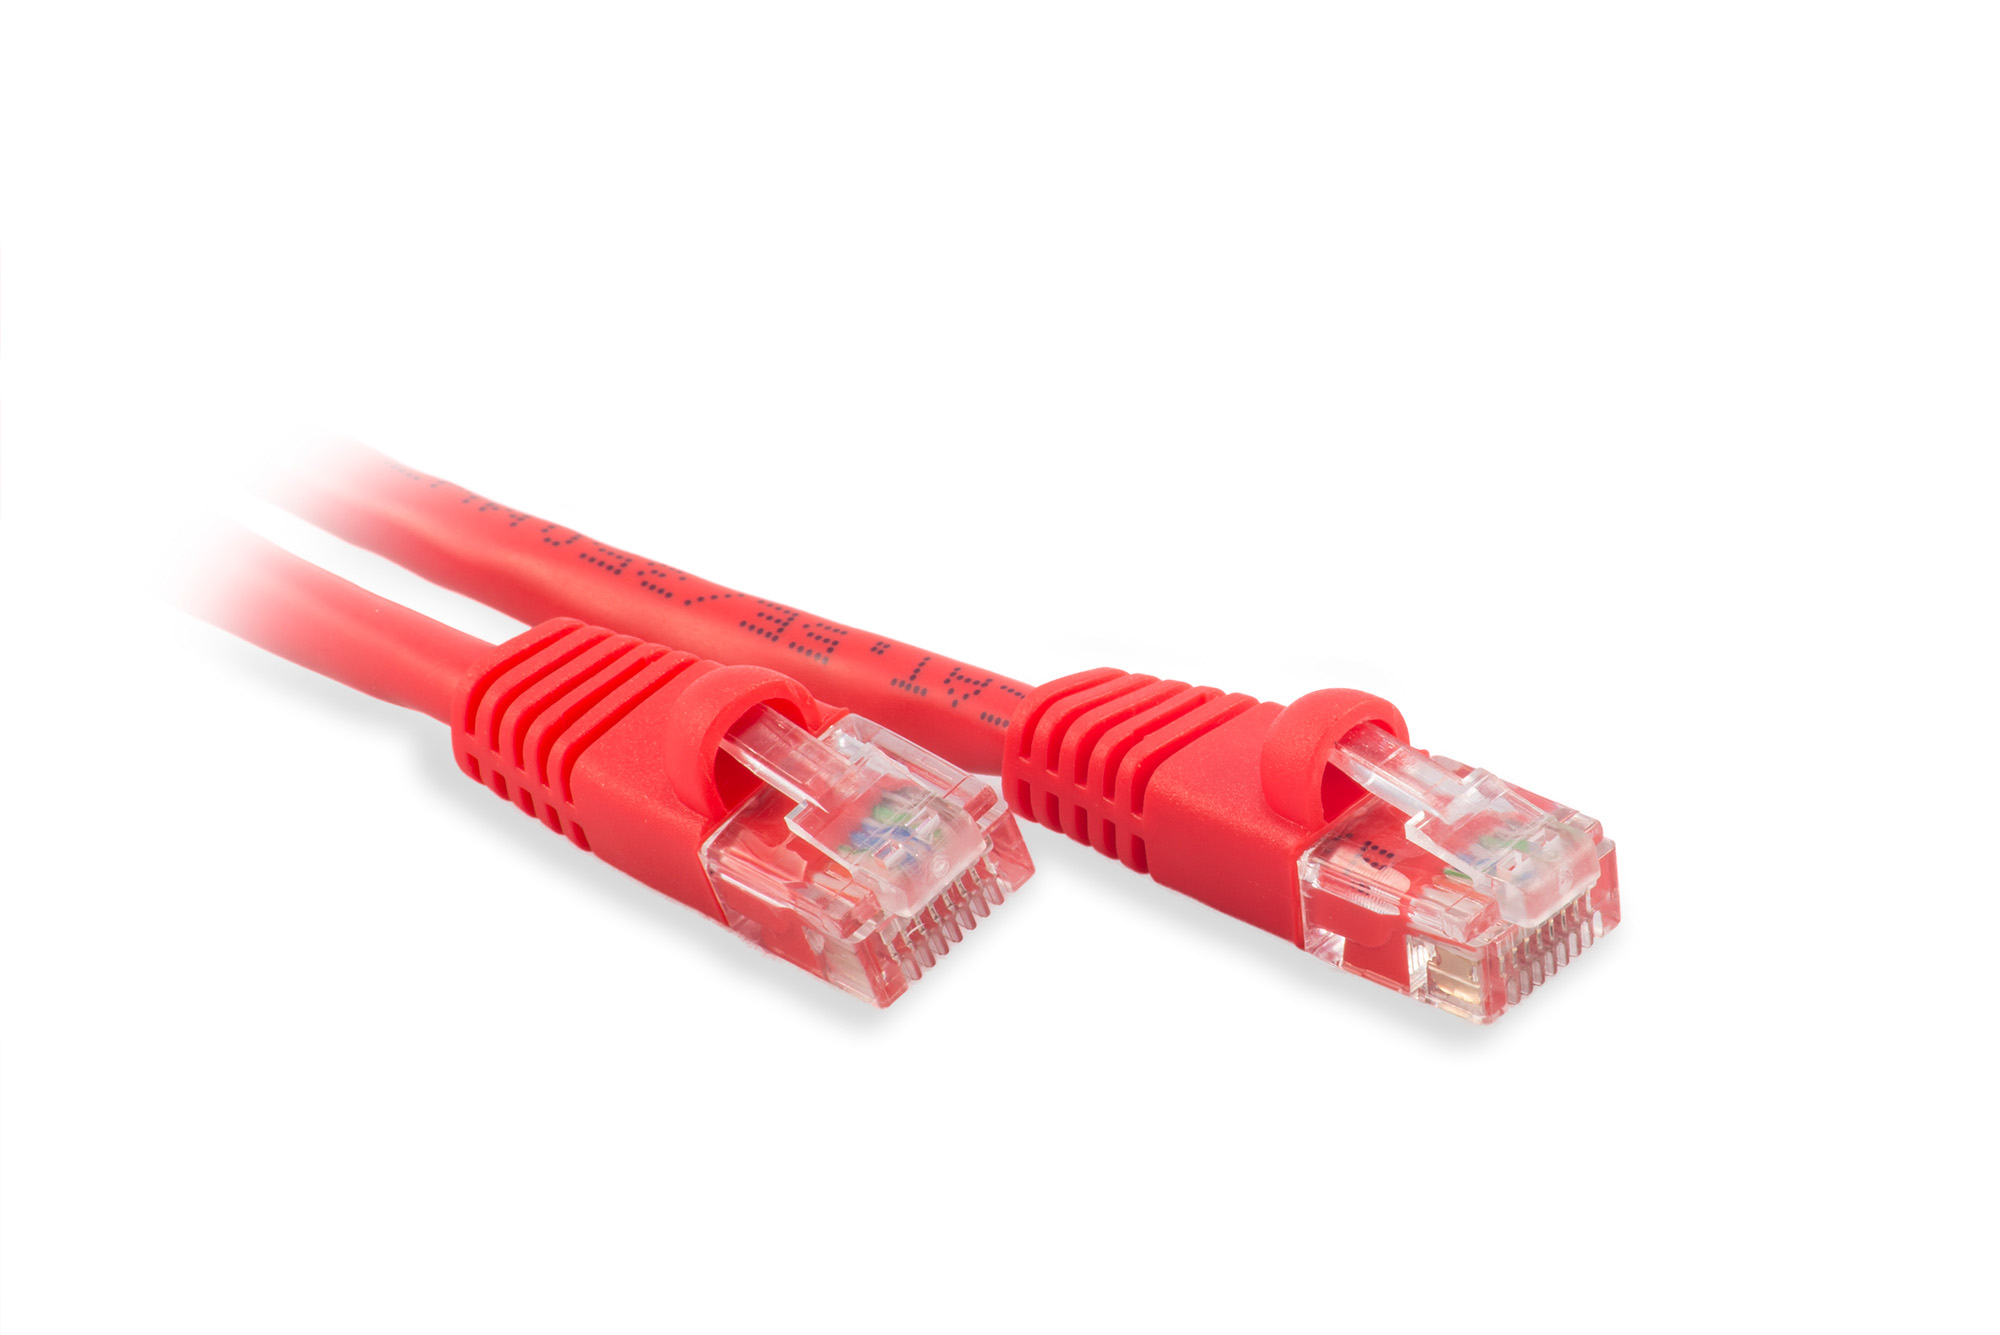 8ft Cat6 Ethernet Patch Cable - Red Color - Snagless Boot